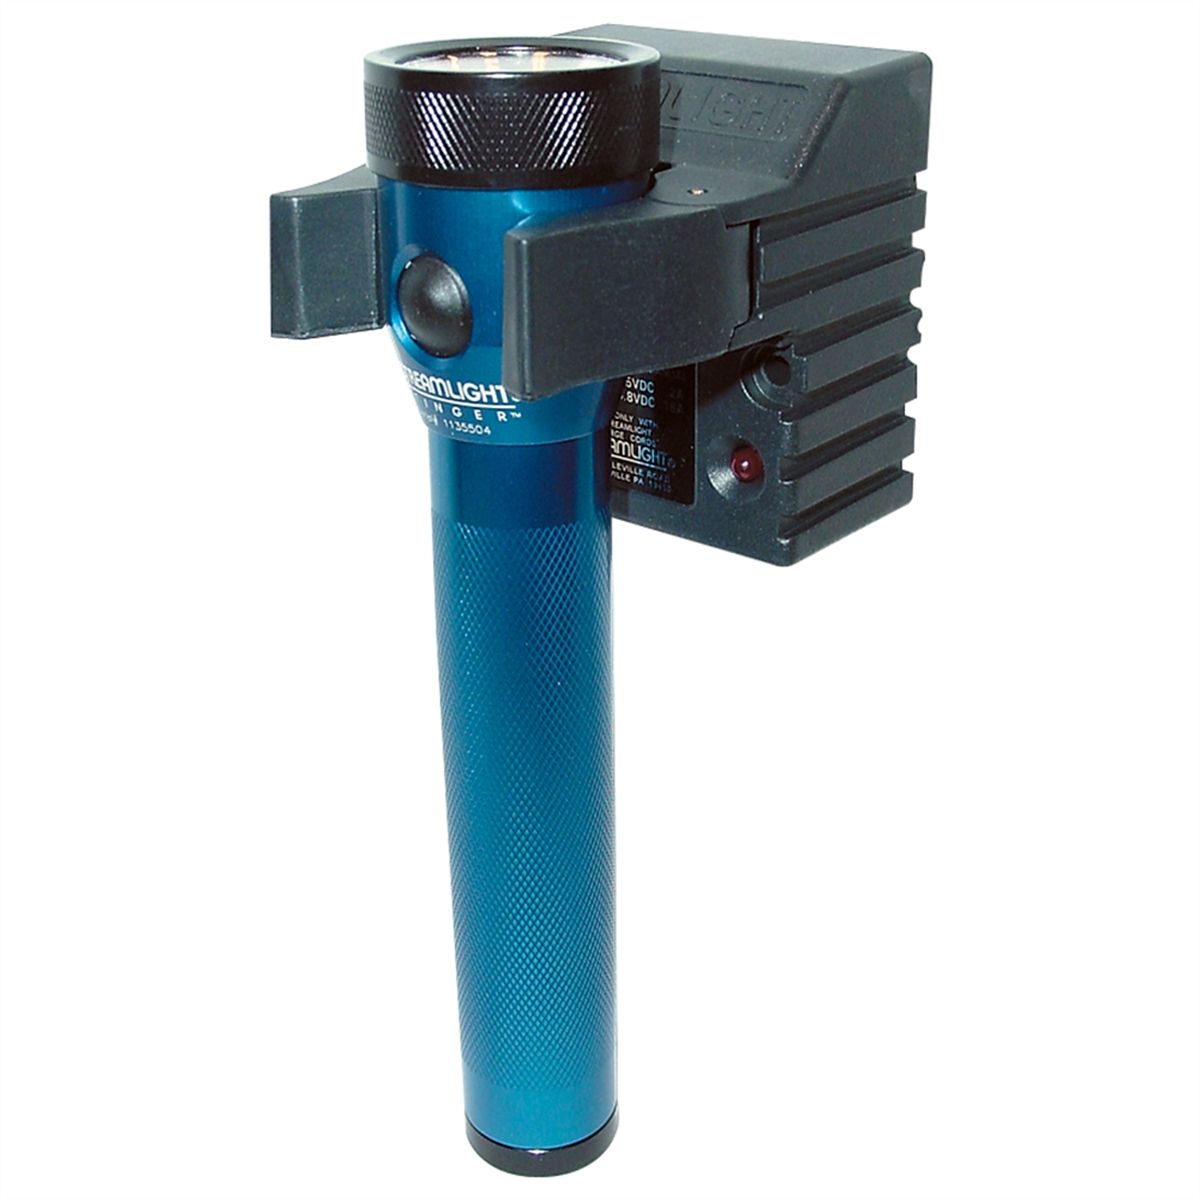 Stinger Rechargeable Flashlight w/ Chargers - Blue